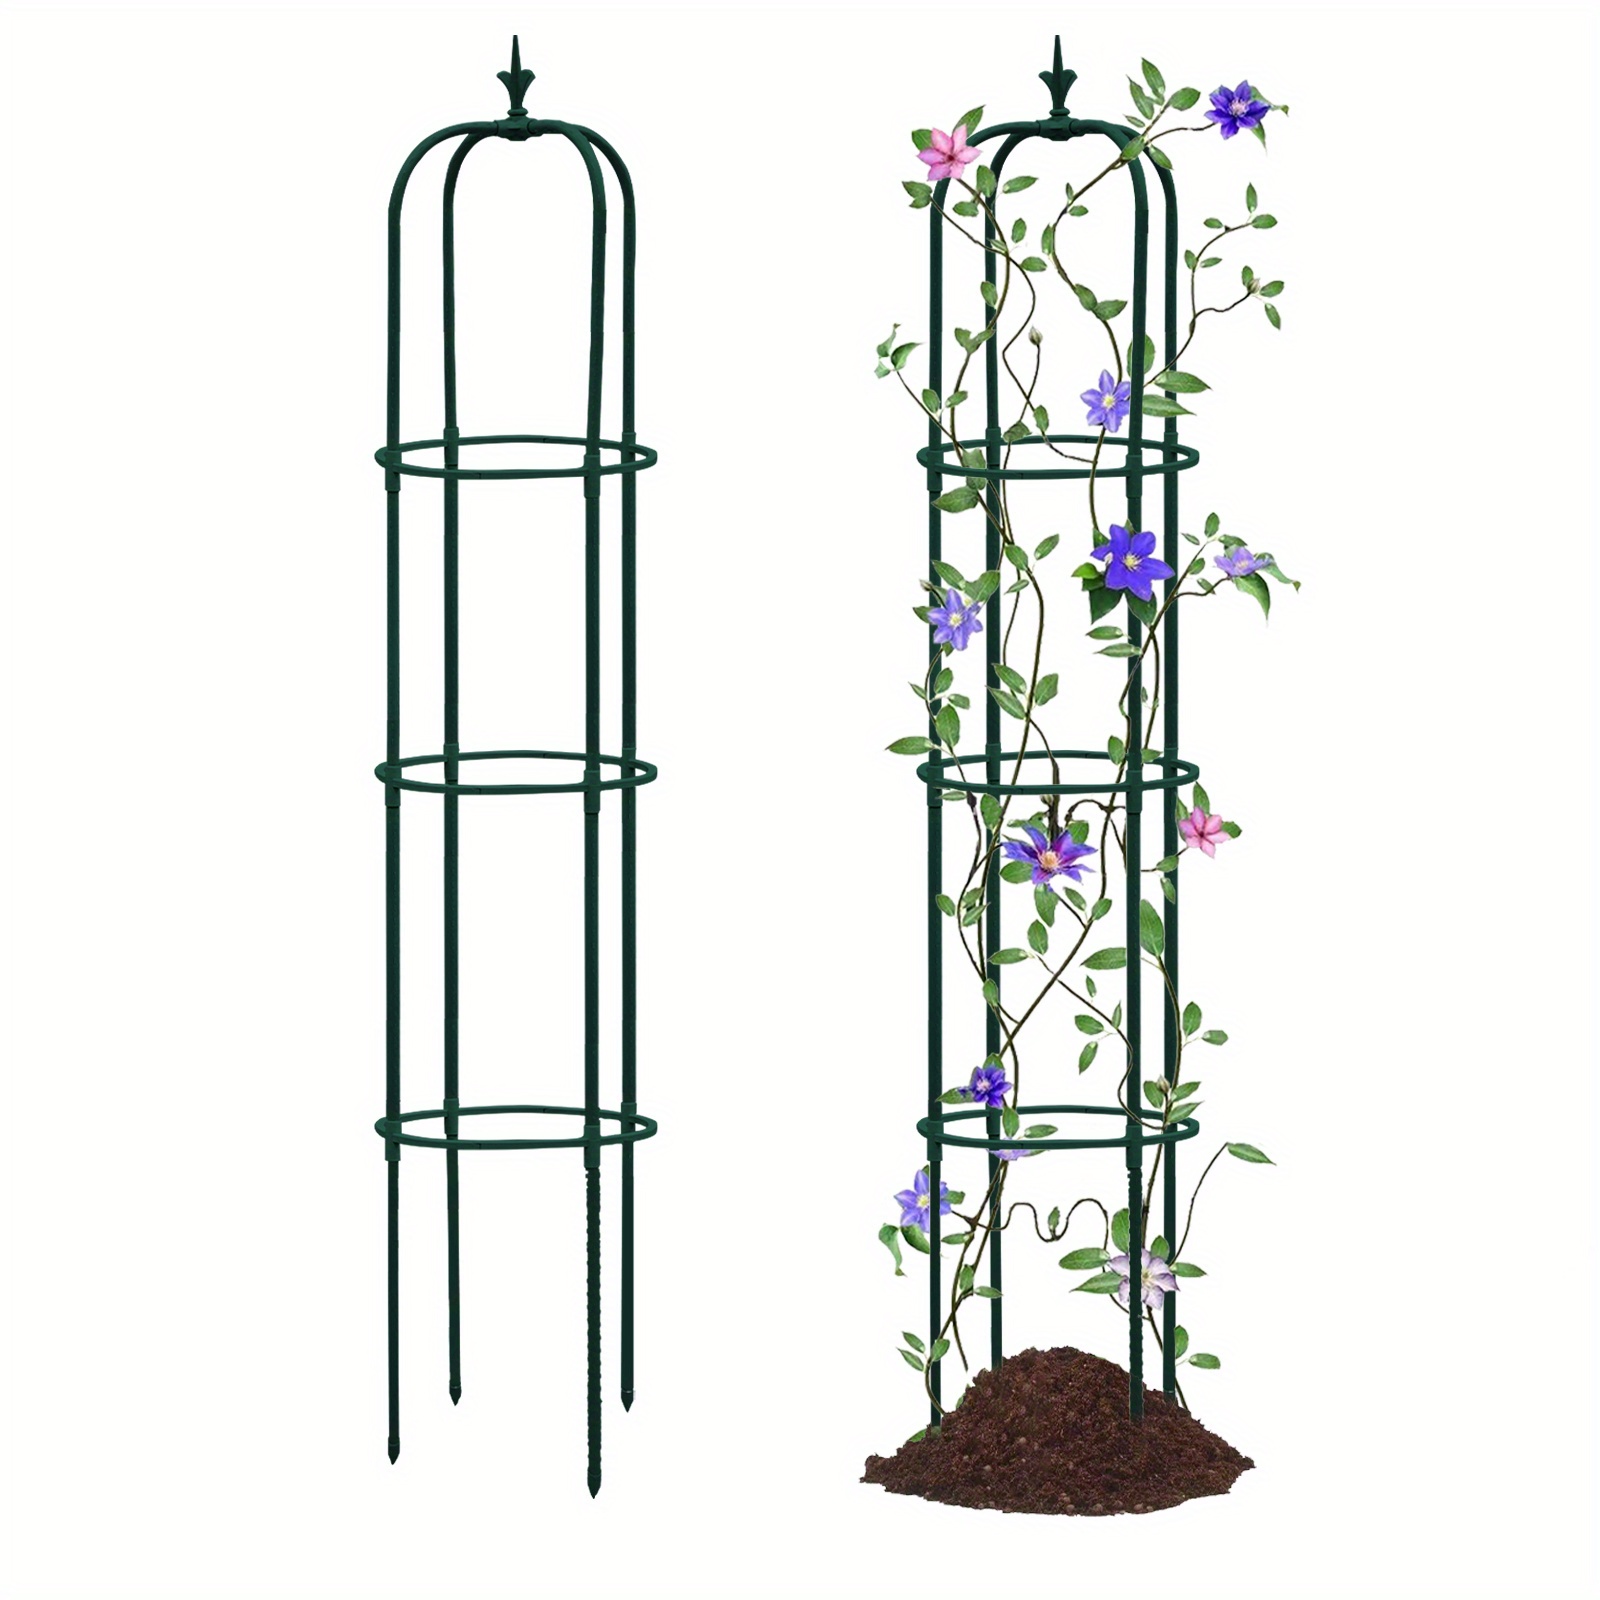 1pc tower obelisk garden trellis plant support for climbing vines and flowers stands black rustproof lightweight plant tower 60 2 11 2 inch green